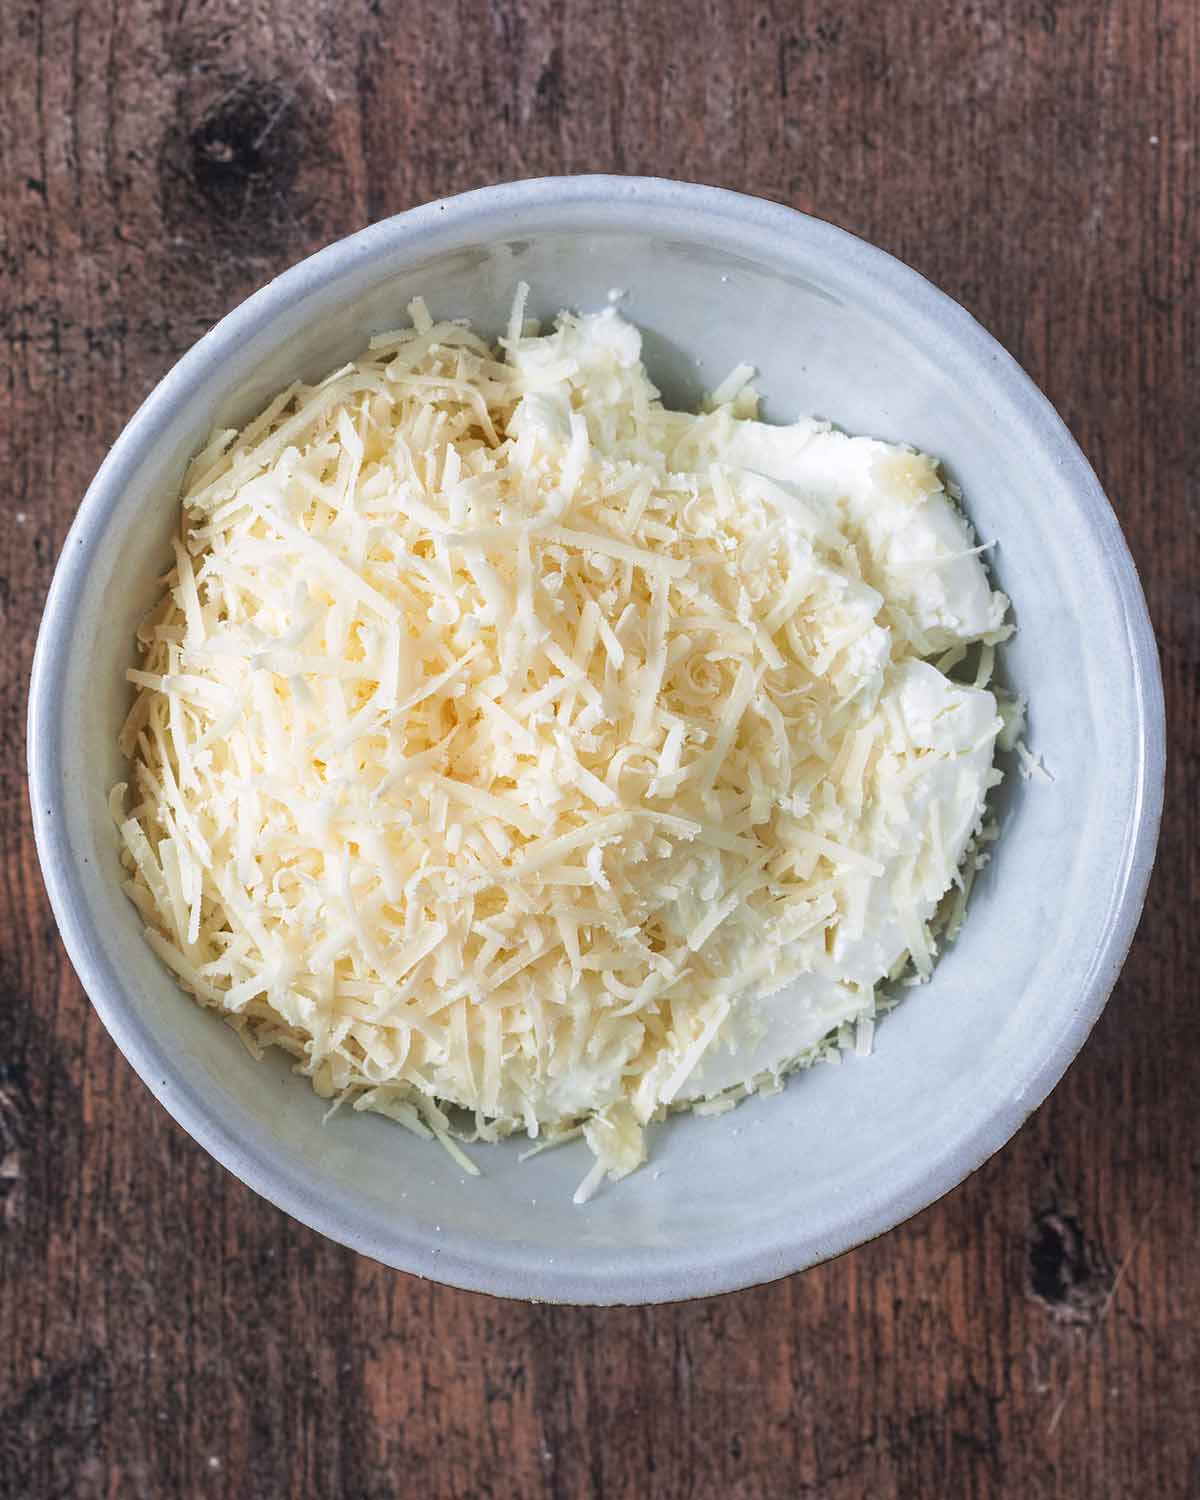 Ricotta and grated parmesan in a small bowl.